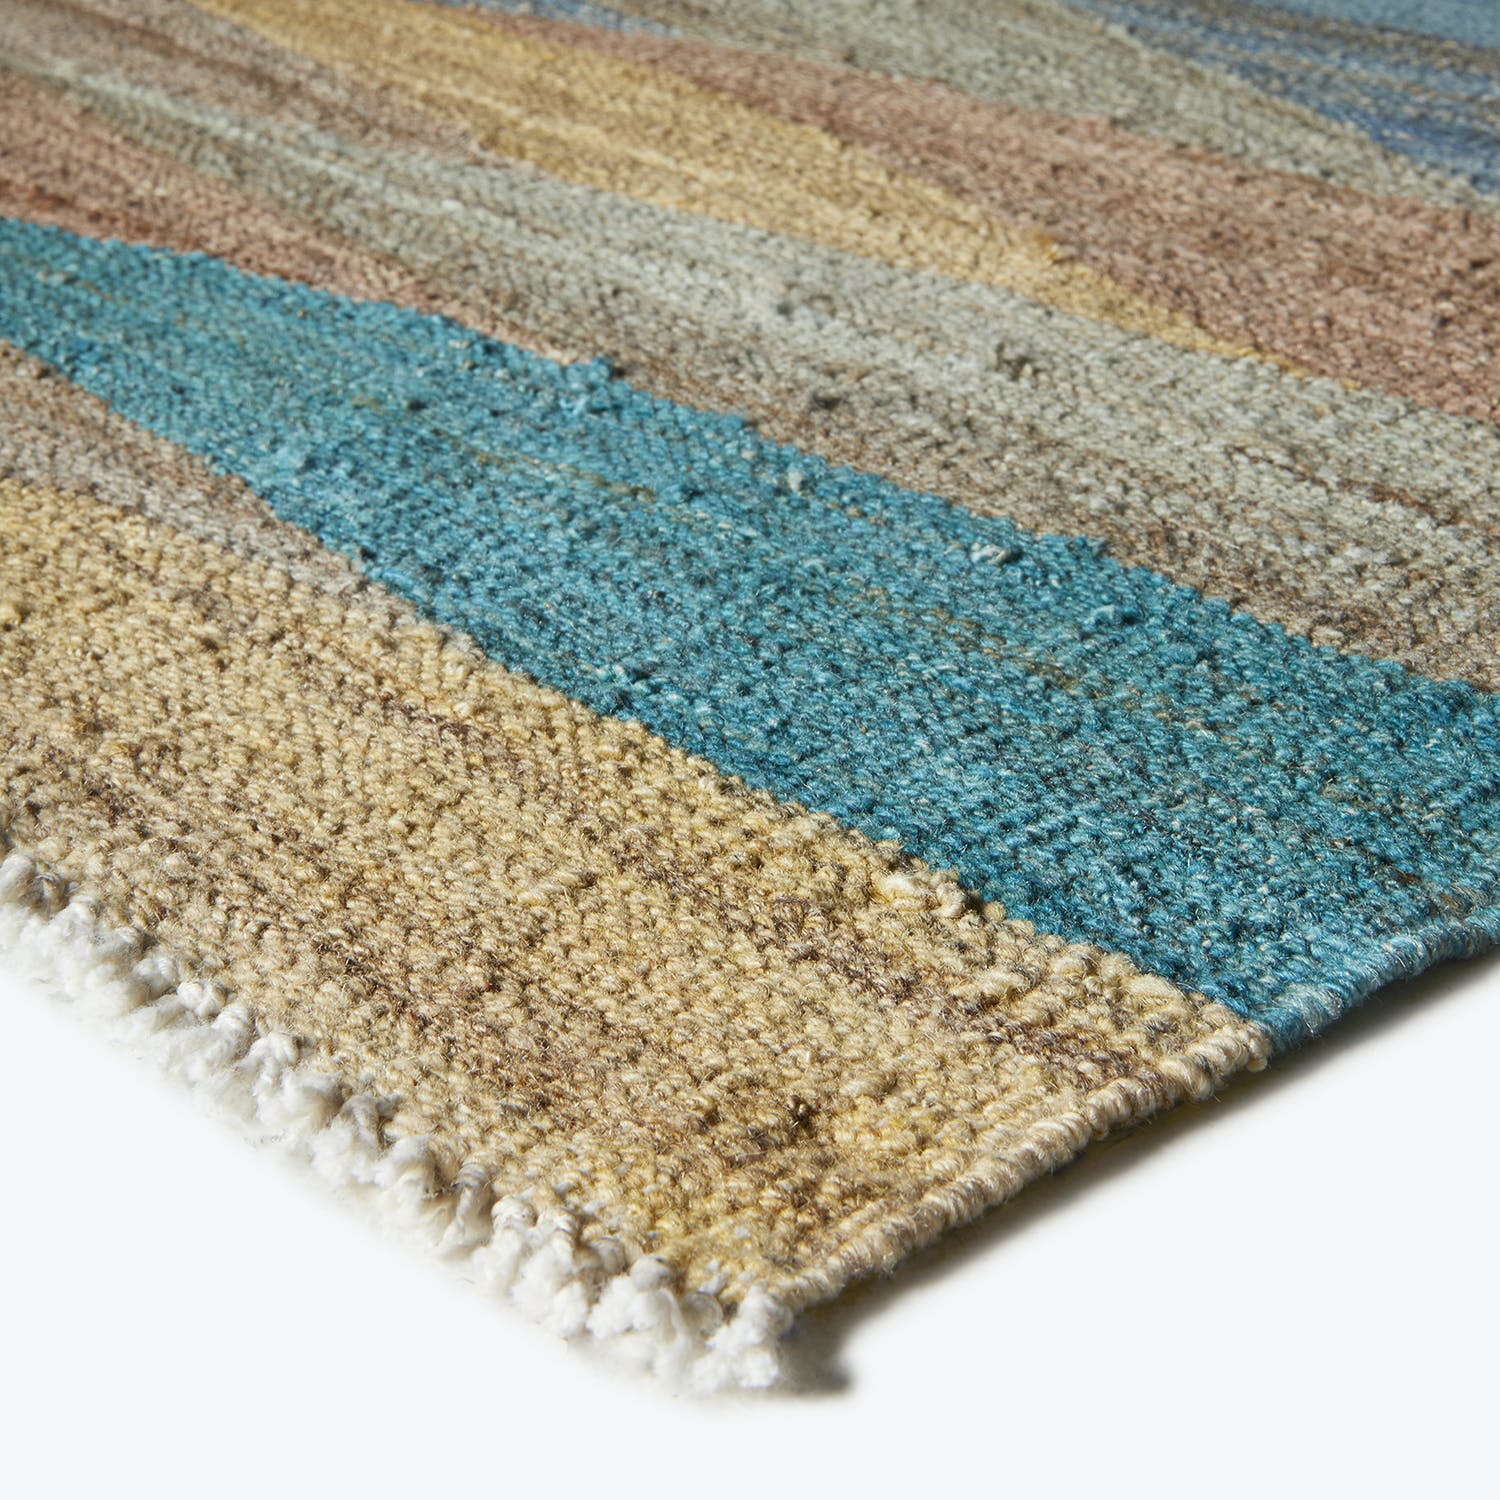 Close-up view of a colorful and textured striped rug with fringe.